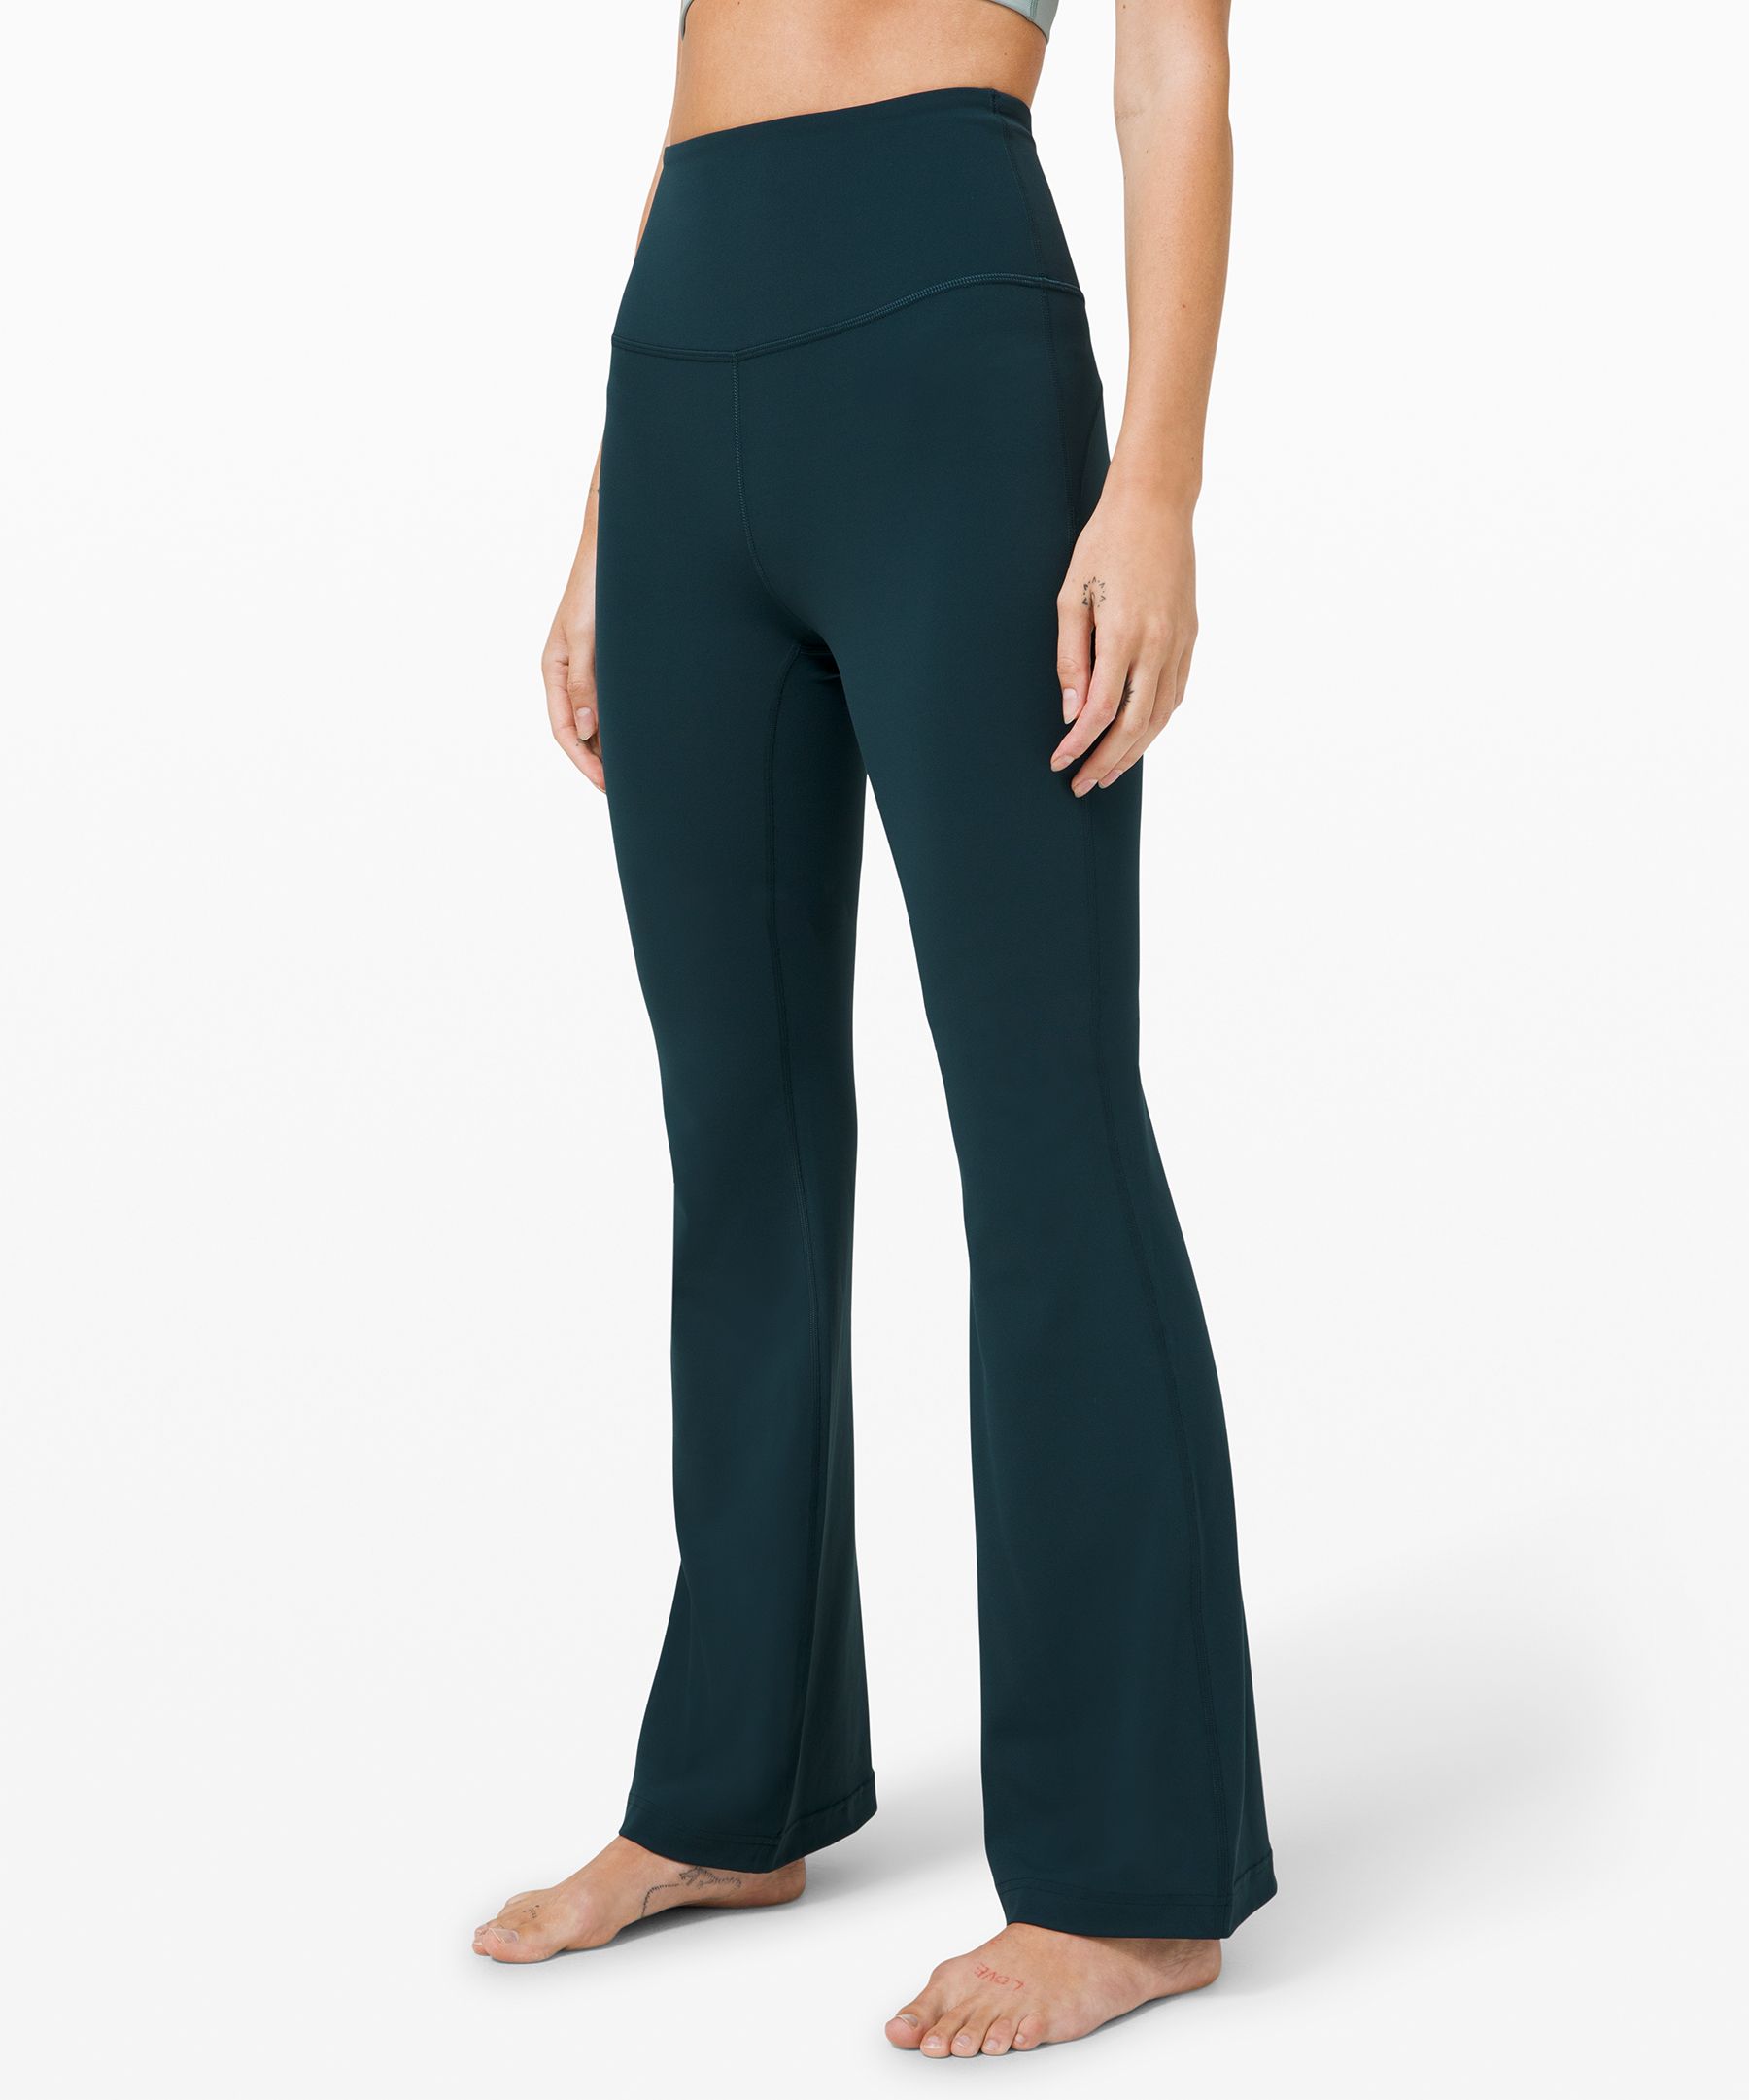 Lululemon Groove Pant Flare 32 Full-on Luon *online Only In Green